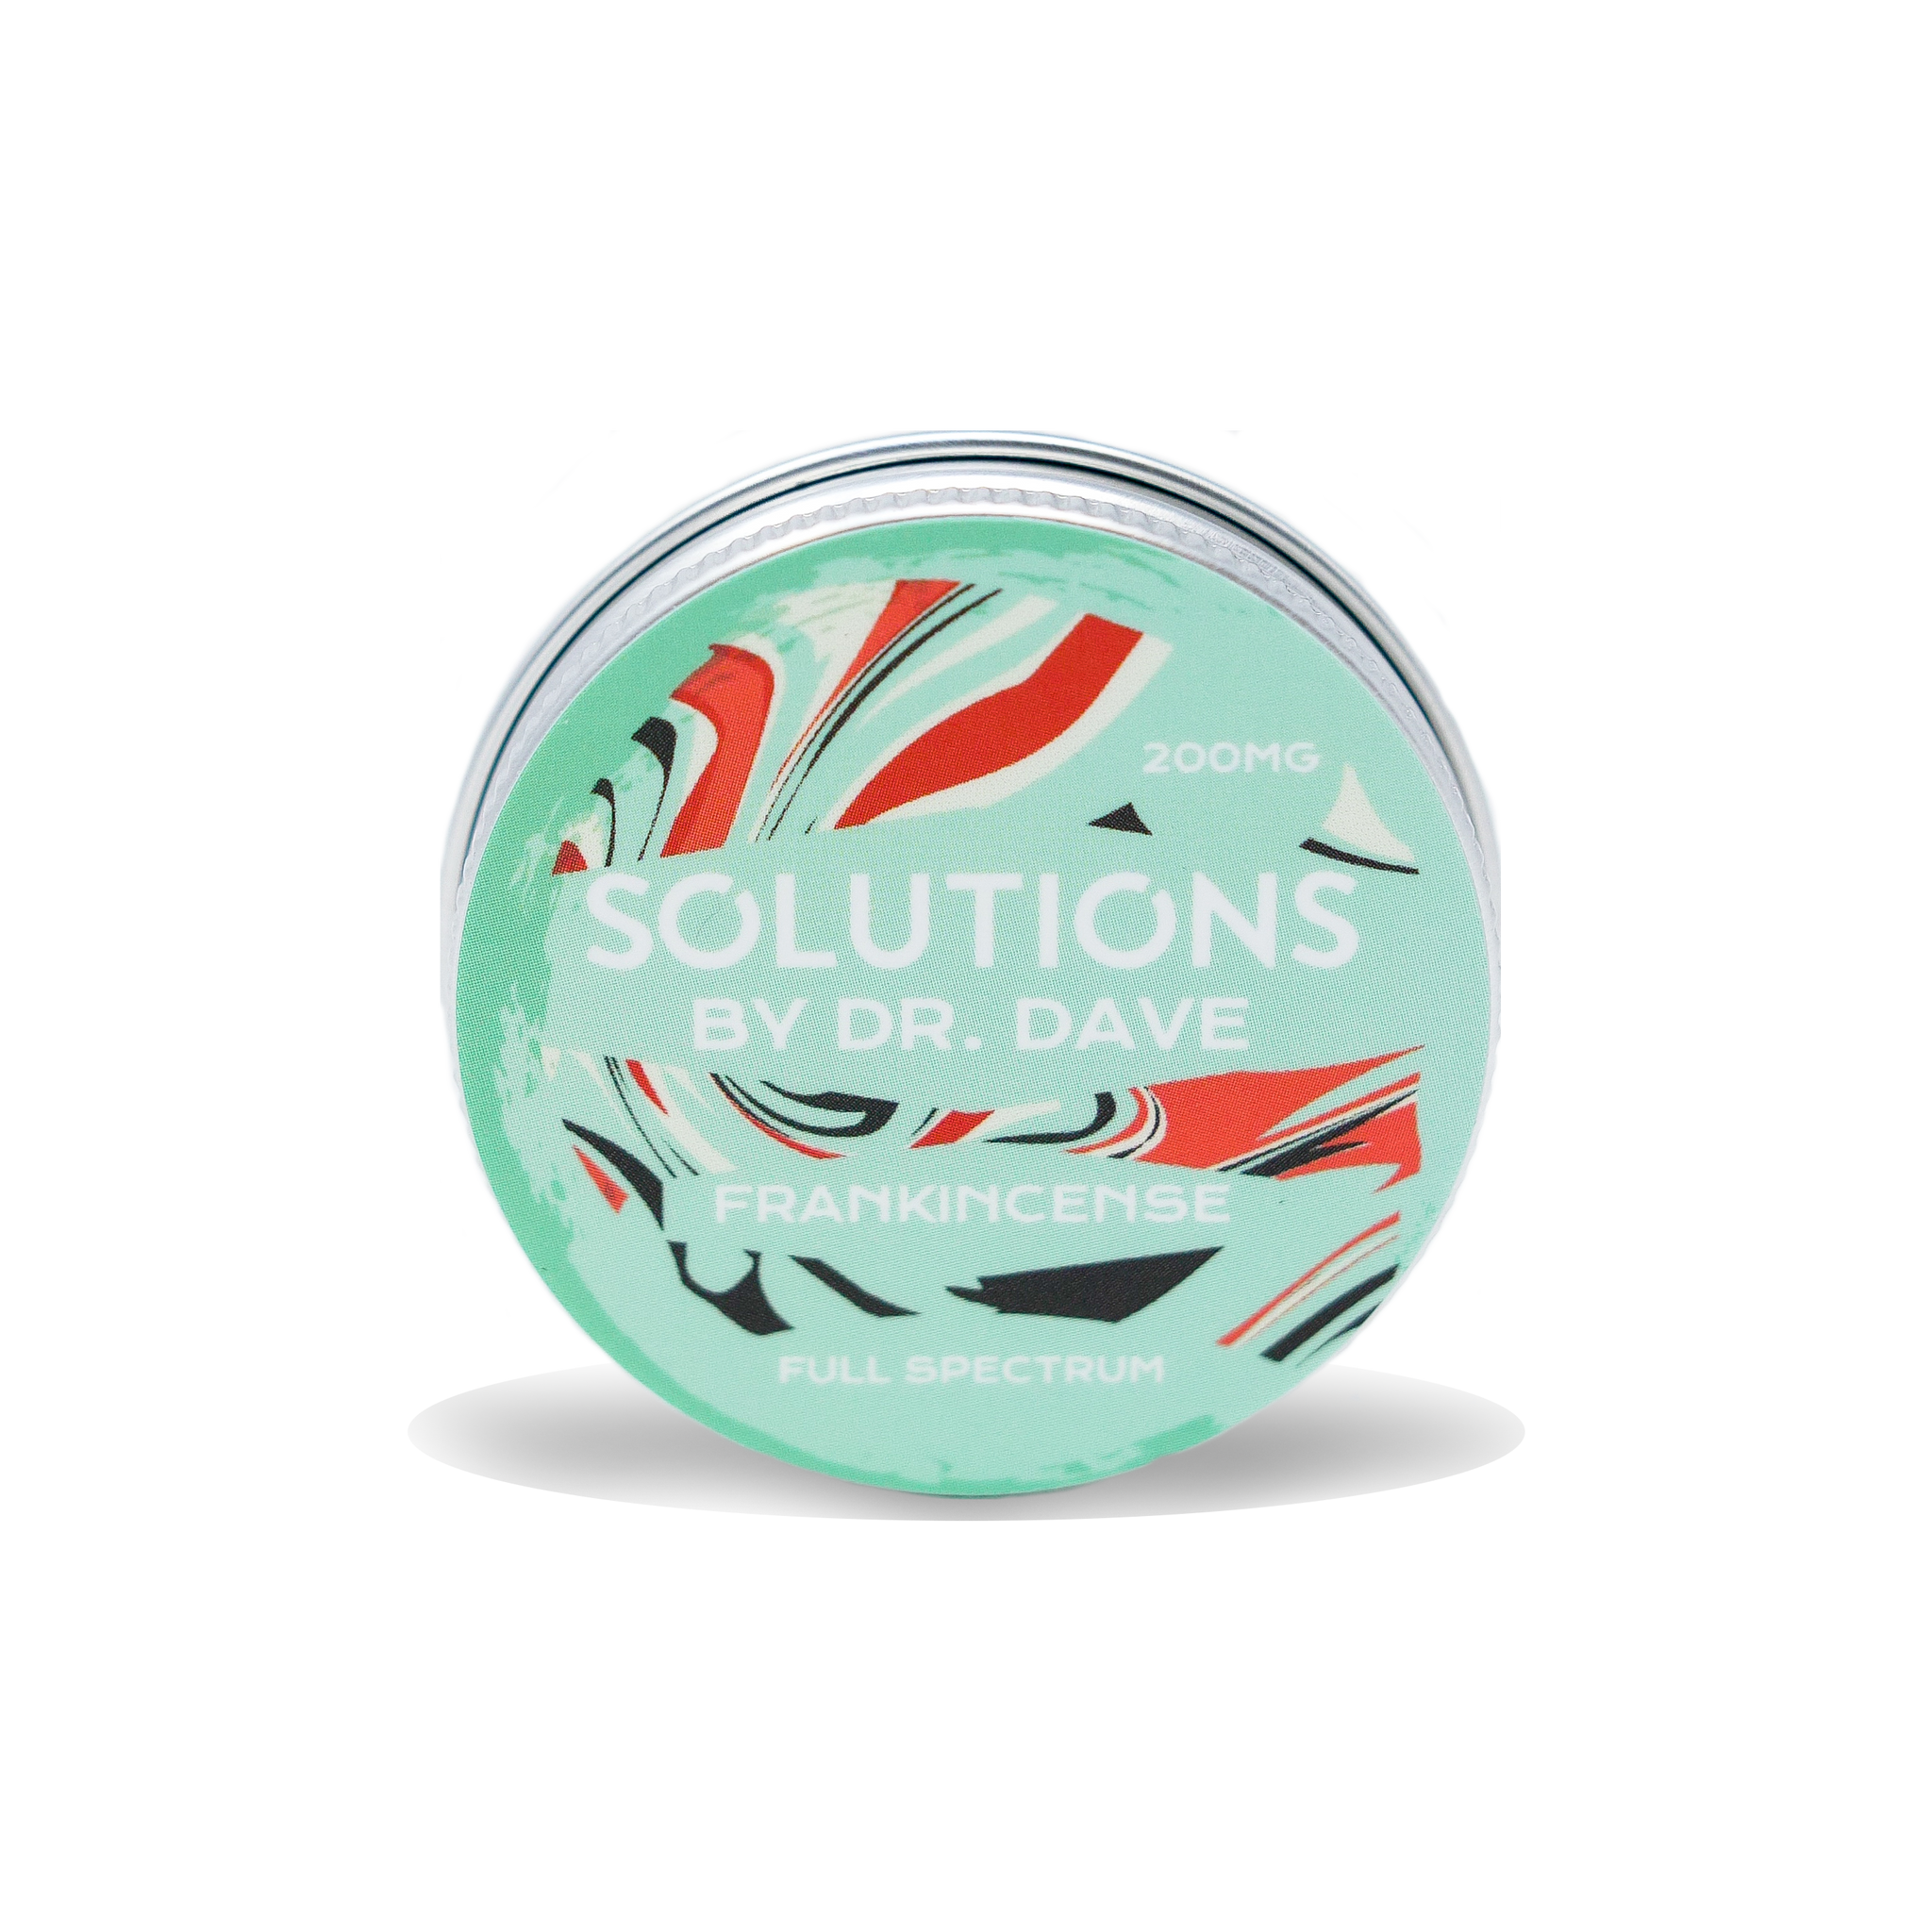 Solutions By Dr. Dave -  CBD Full Spectrum Topical Balm